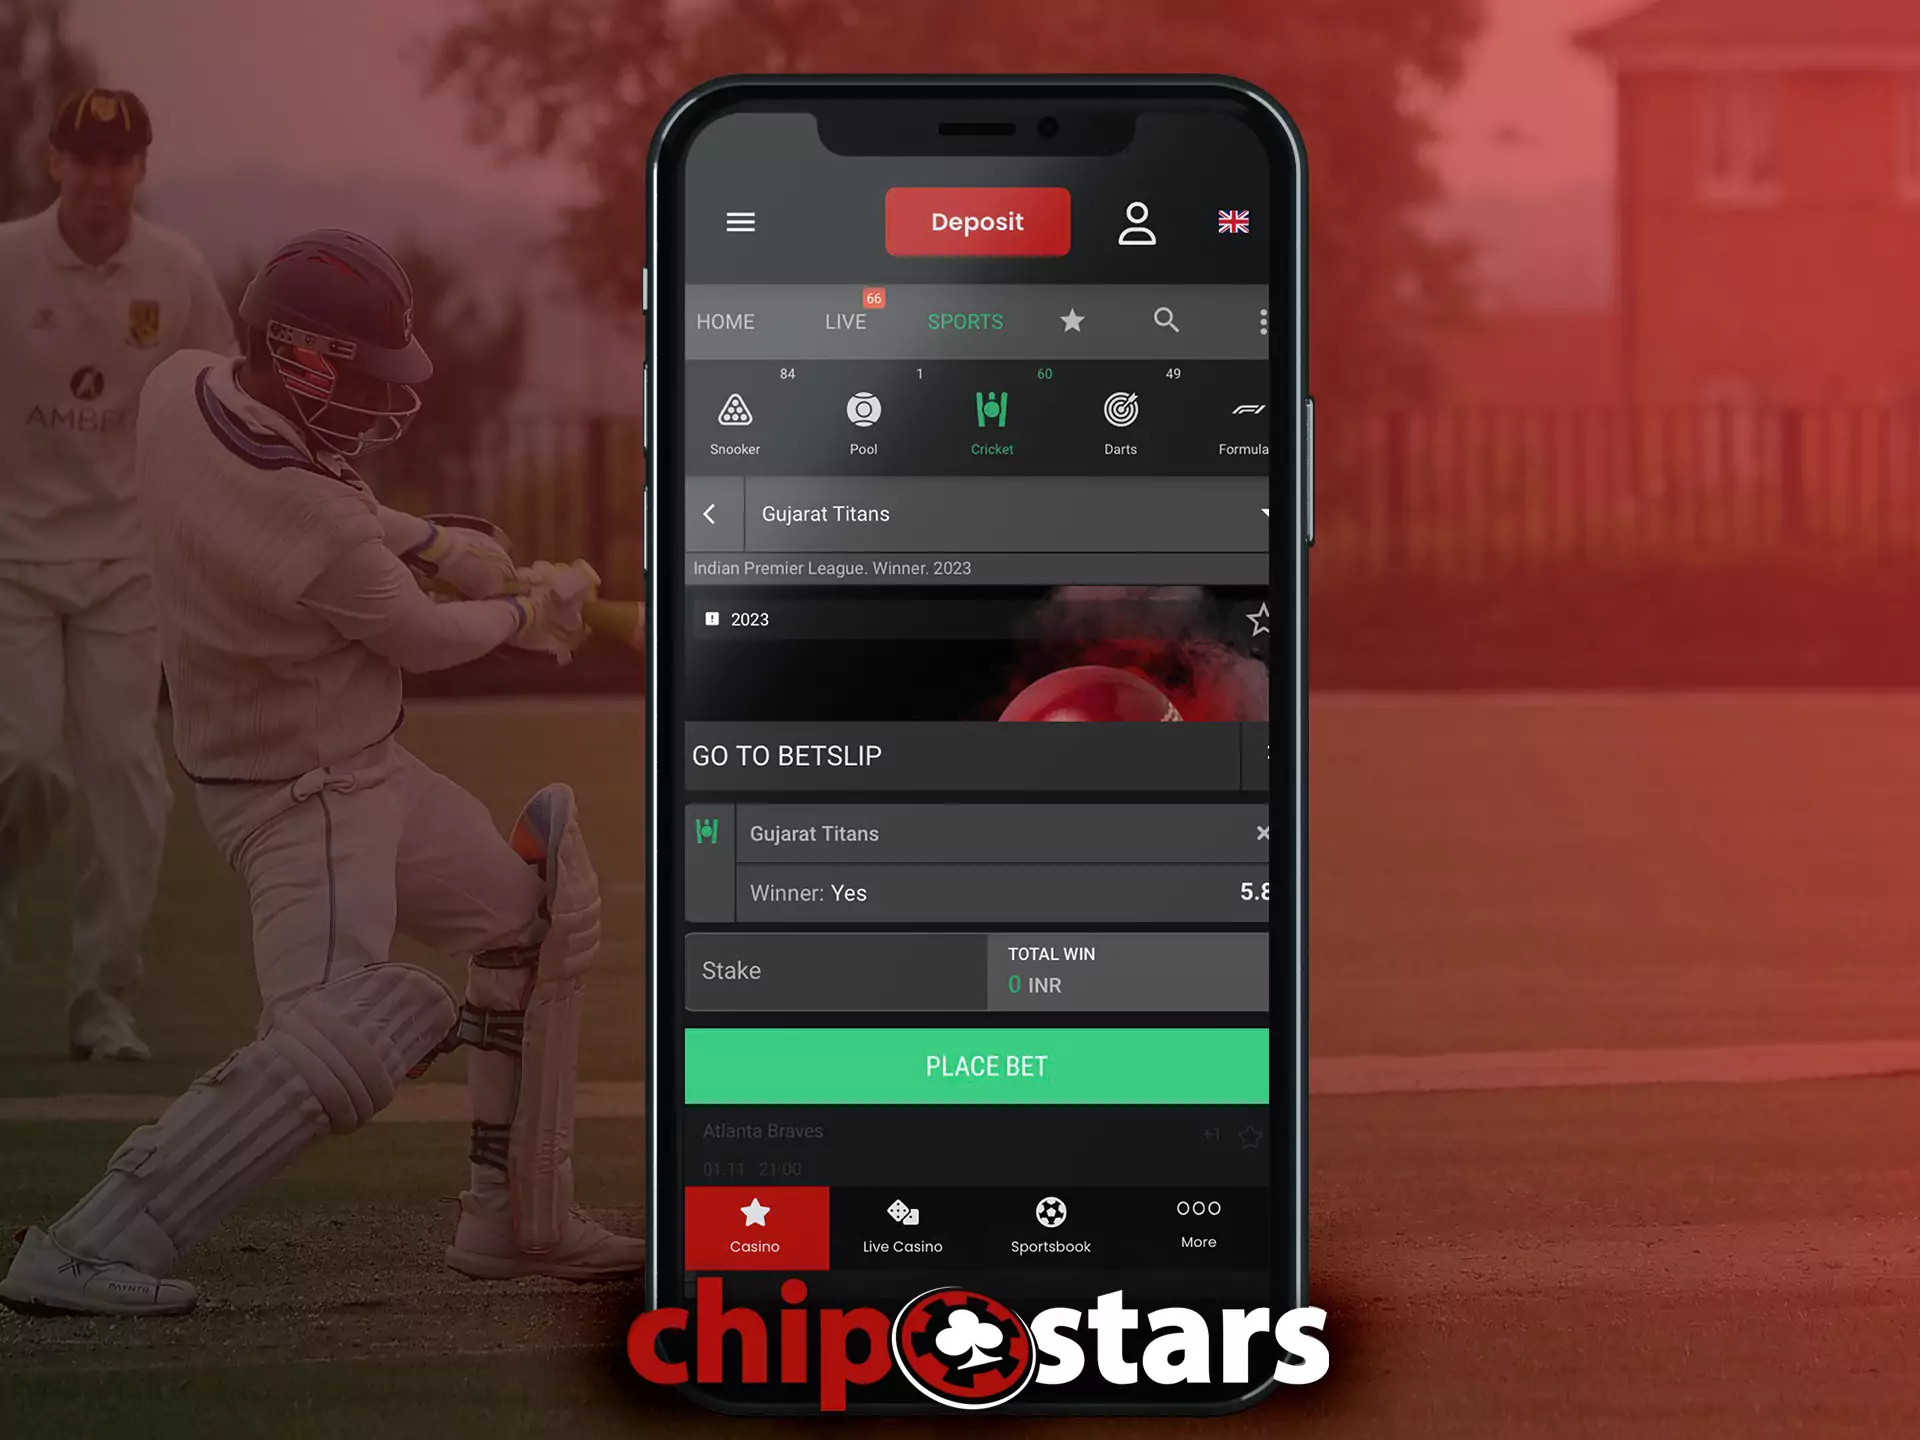 Betting in the Chipstars sports sections, you can combine different types of bets.